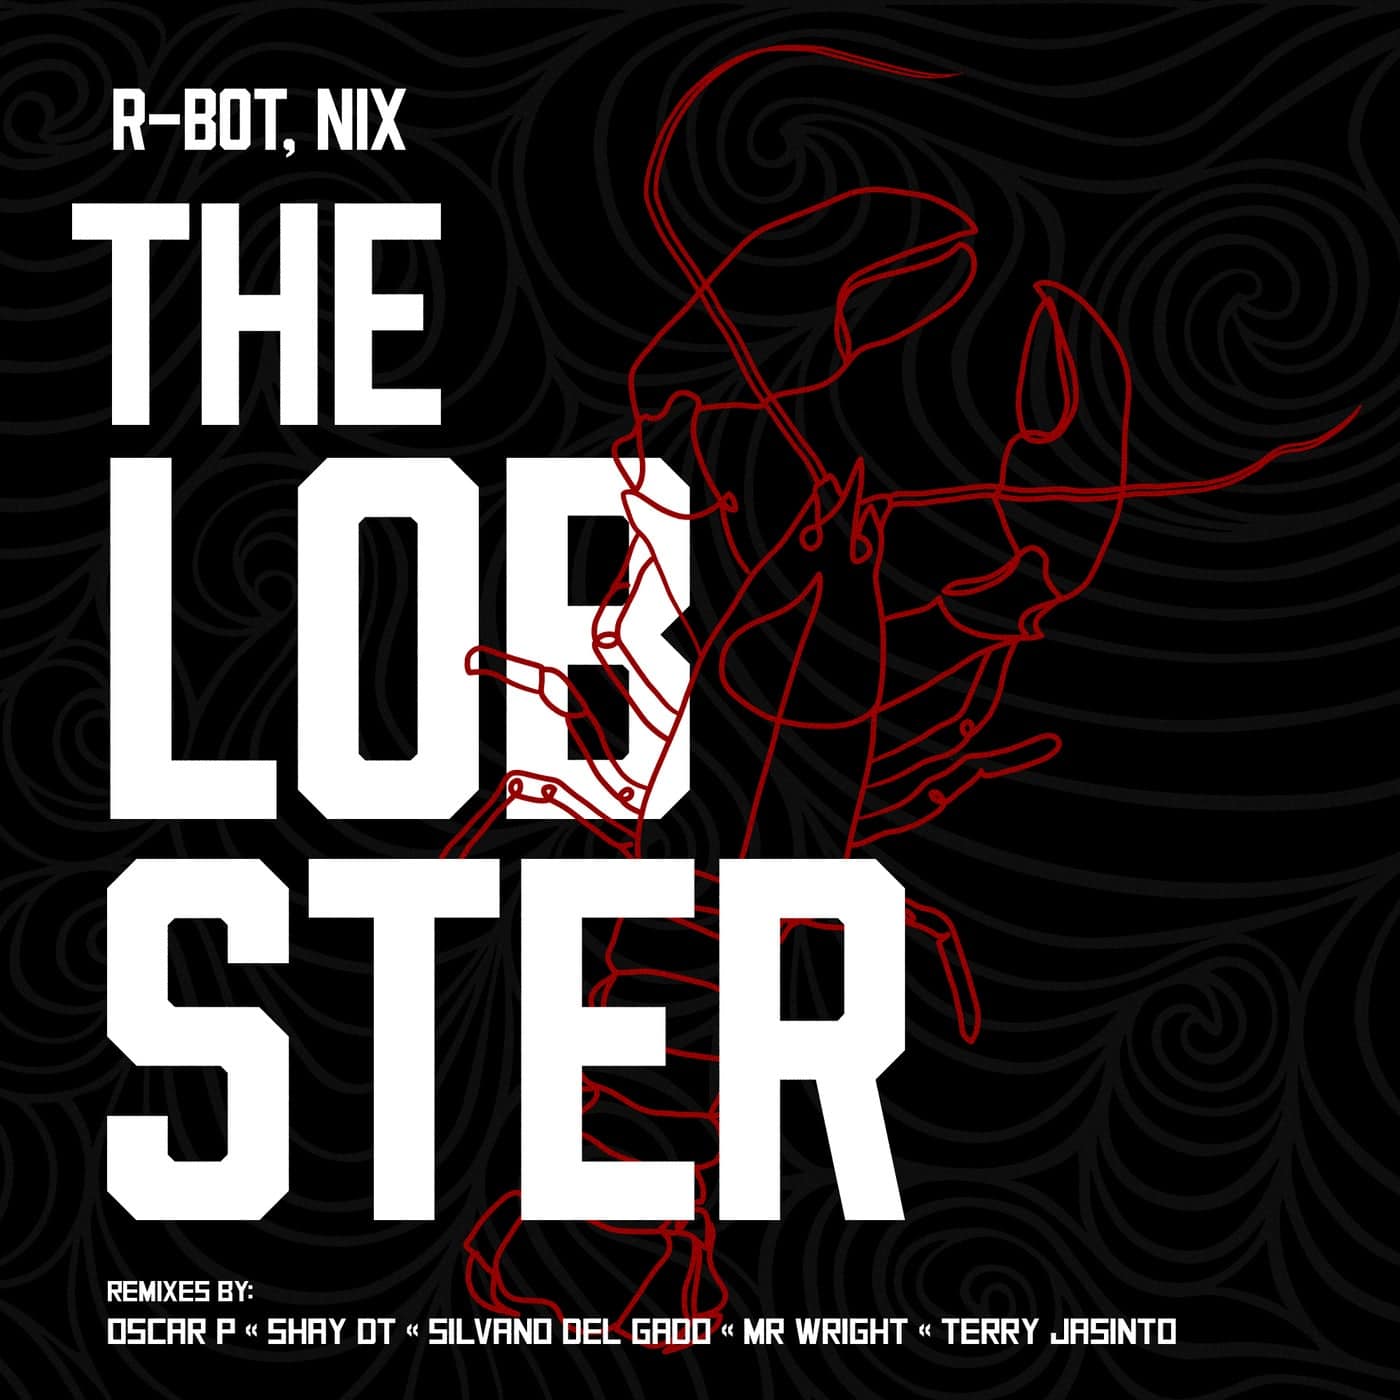 image cover: Nix, R-Bot - The Lobster / H343